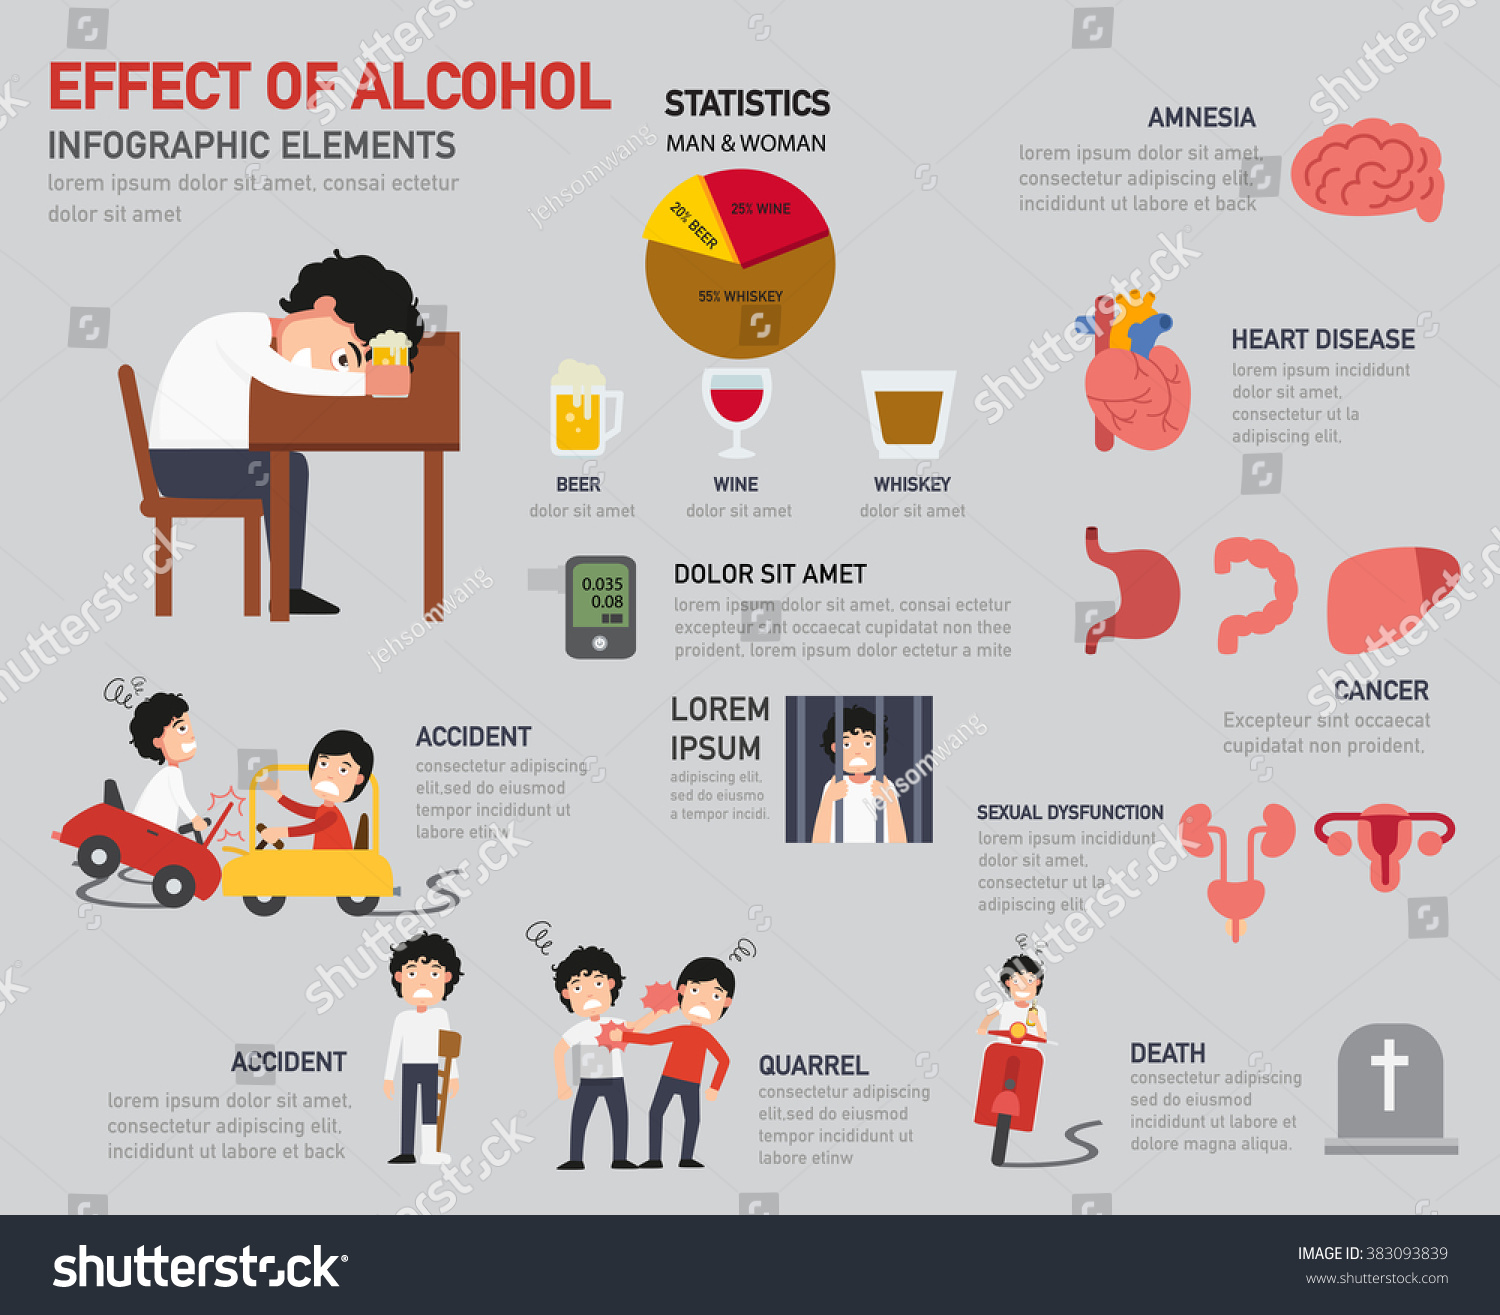 Effect Alcohol Infographicsvector Illustration Stock Vector Royalty Free 383093839 Shutterstock 1919